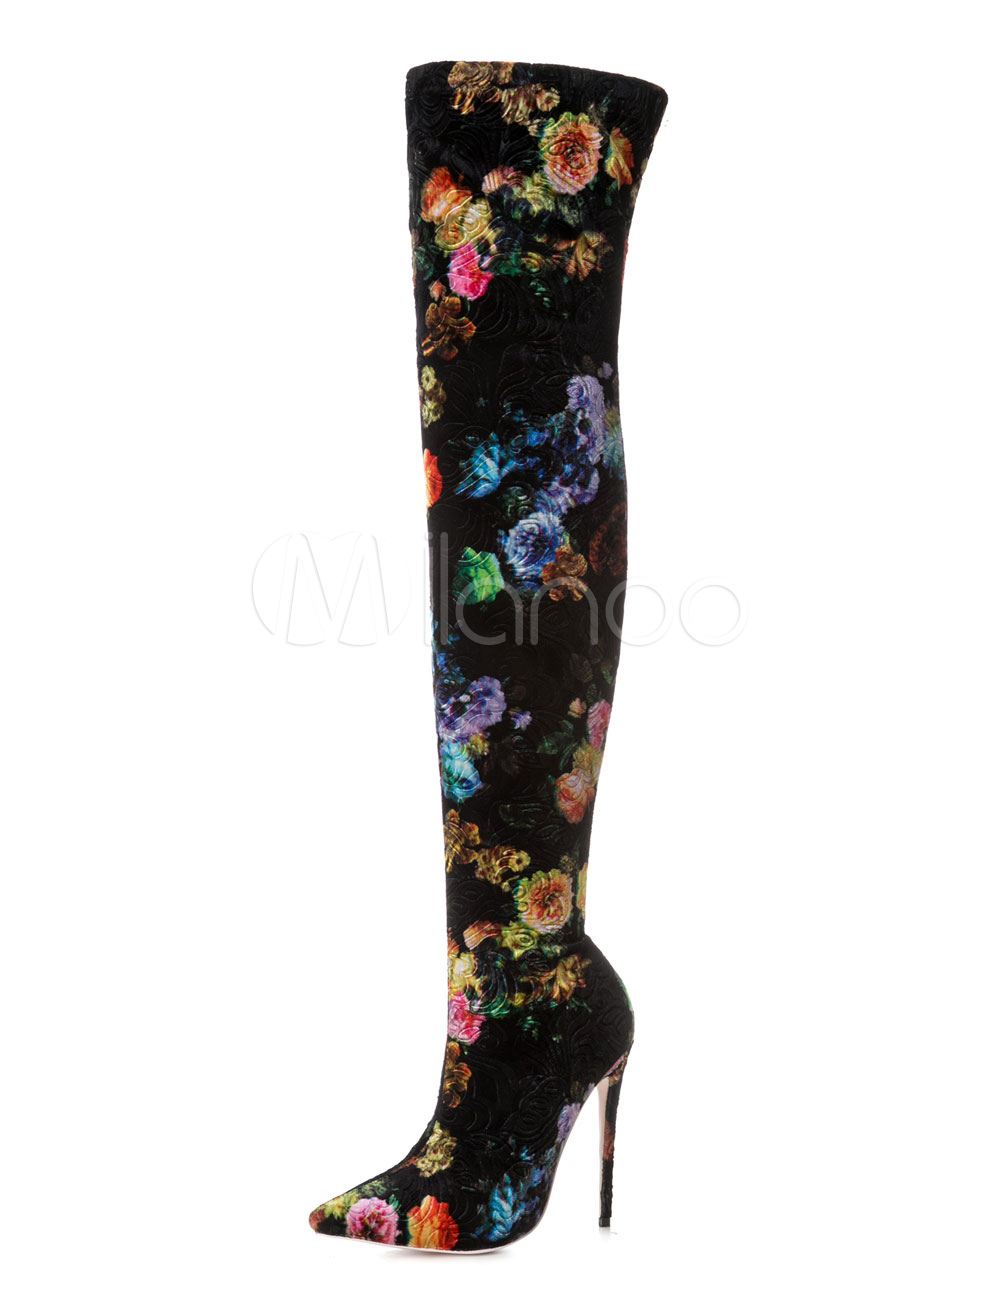 Black Over Knee Boots Pointed Toe Floral Printed High Heel Boots Women ...